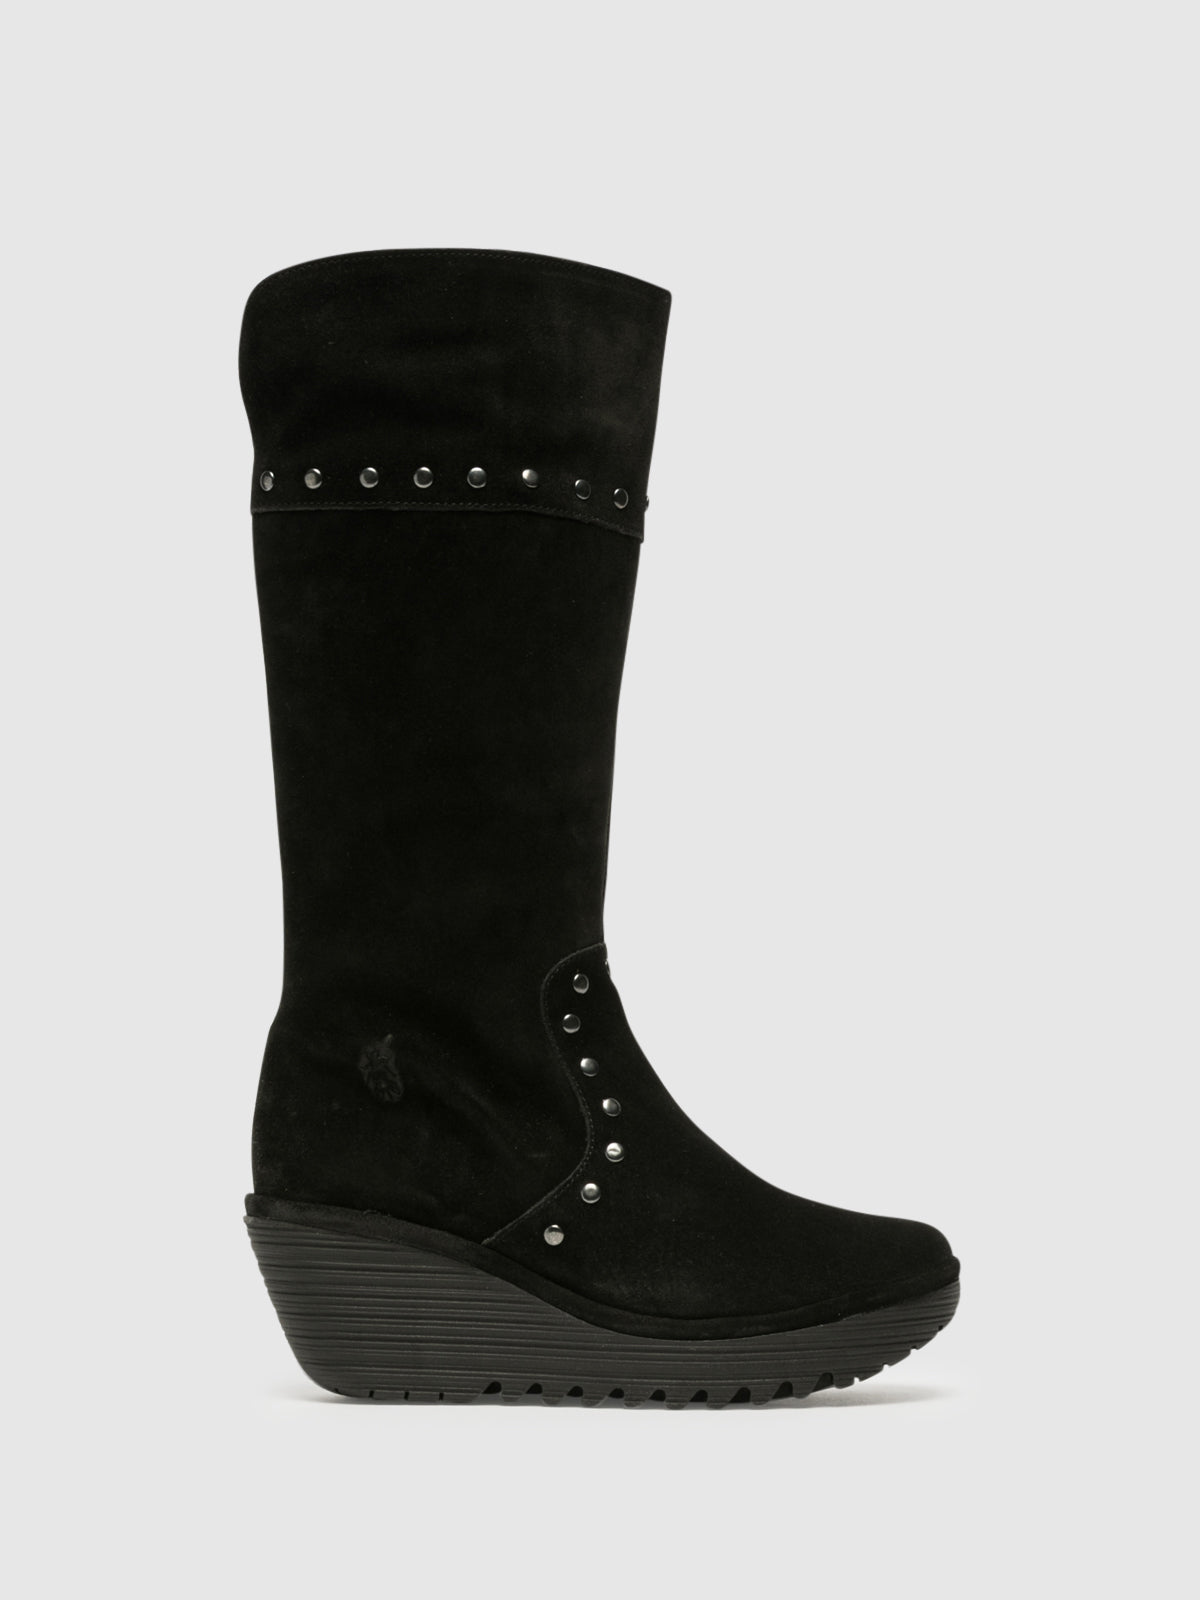 Fly London Black Studded Boots